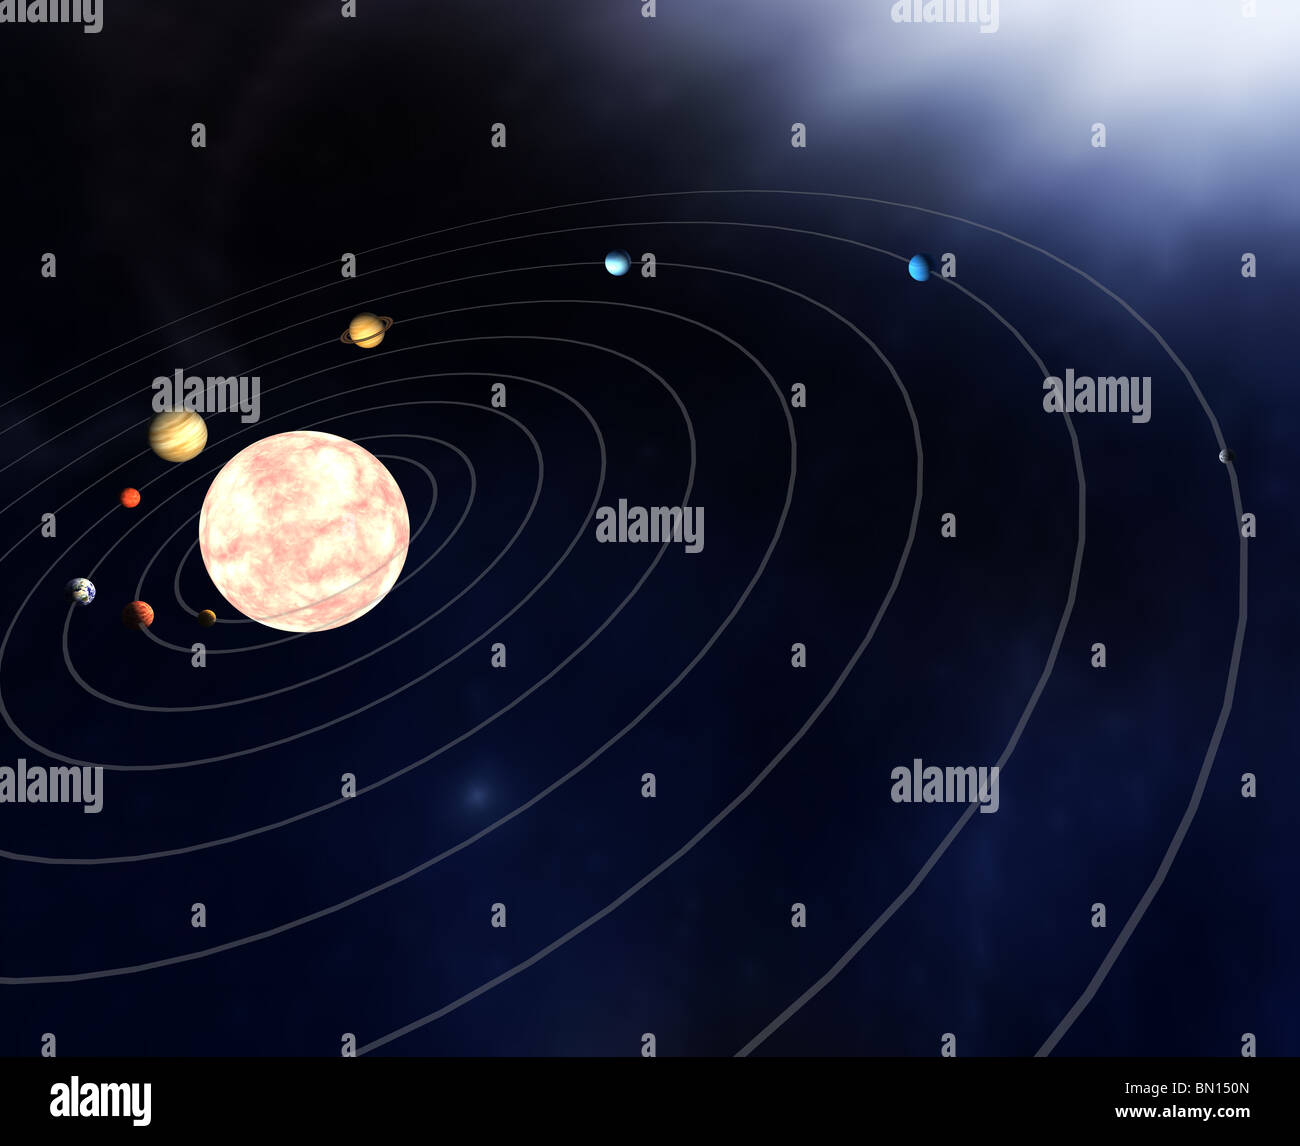 Diagram of the planets in the Solar System Stock Photo